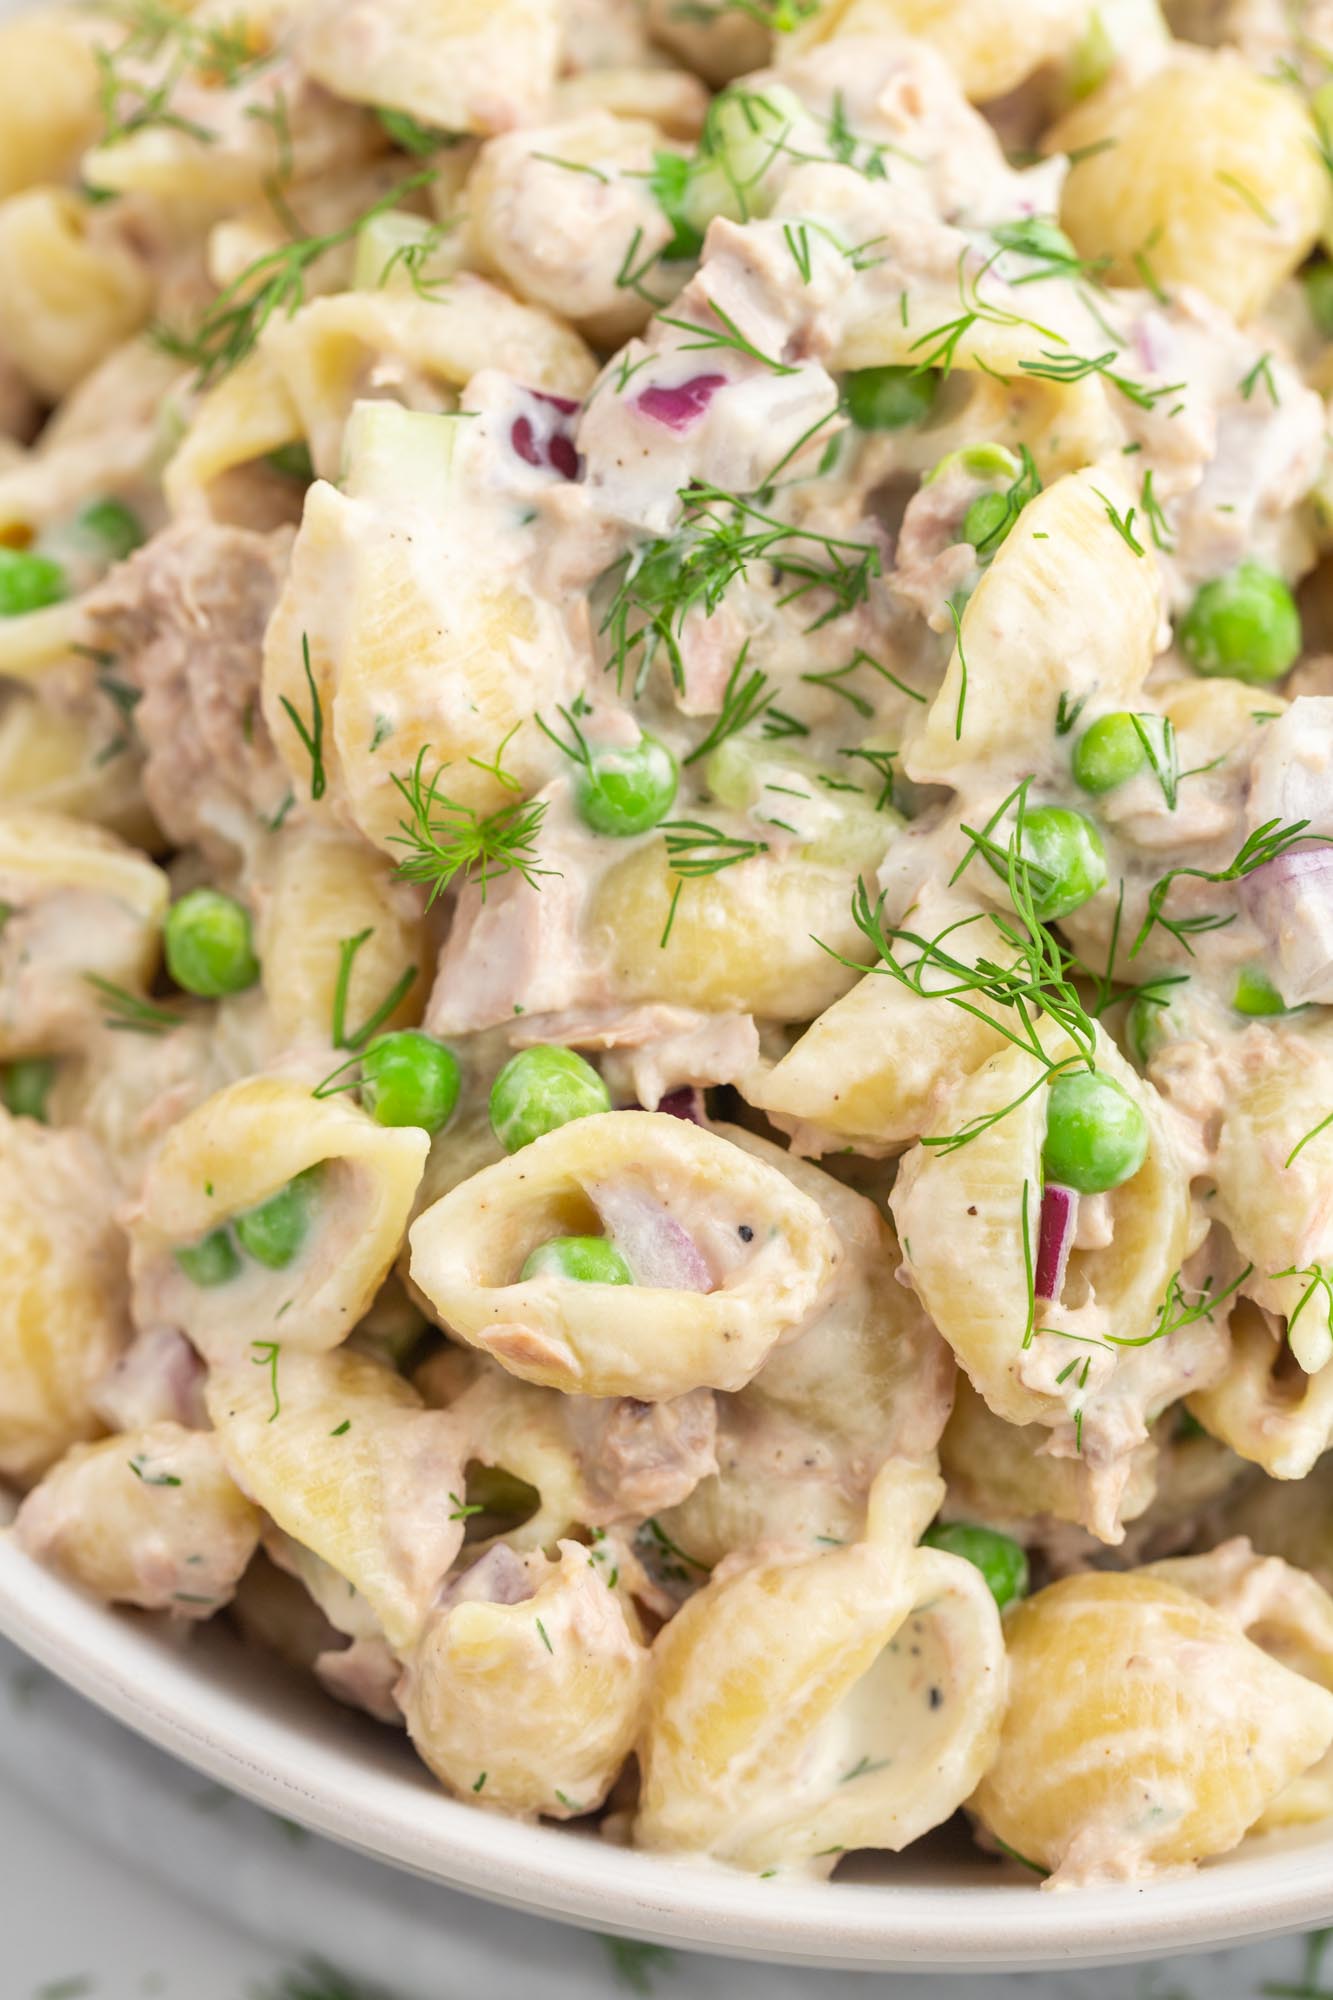 Tuna pasta salad with peas and dill, shown up close to show detail. 